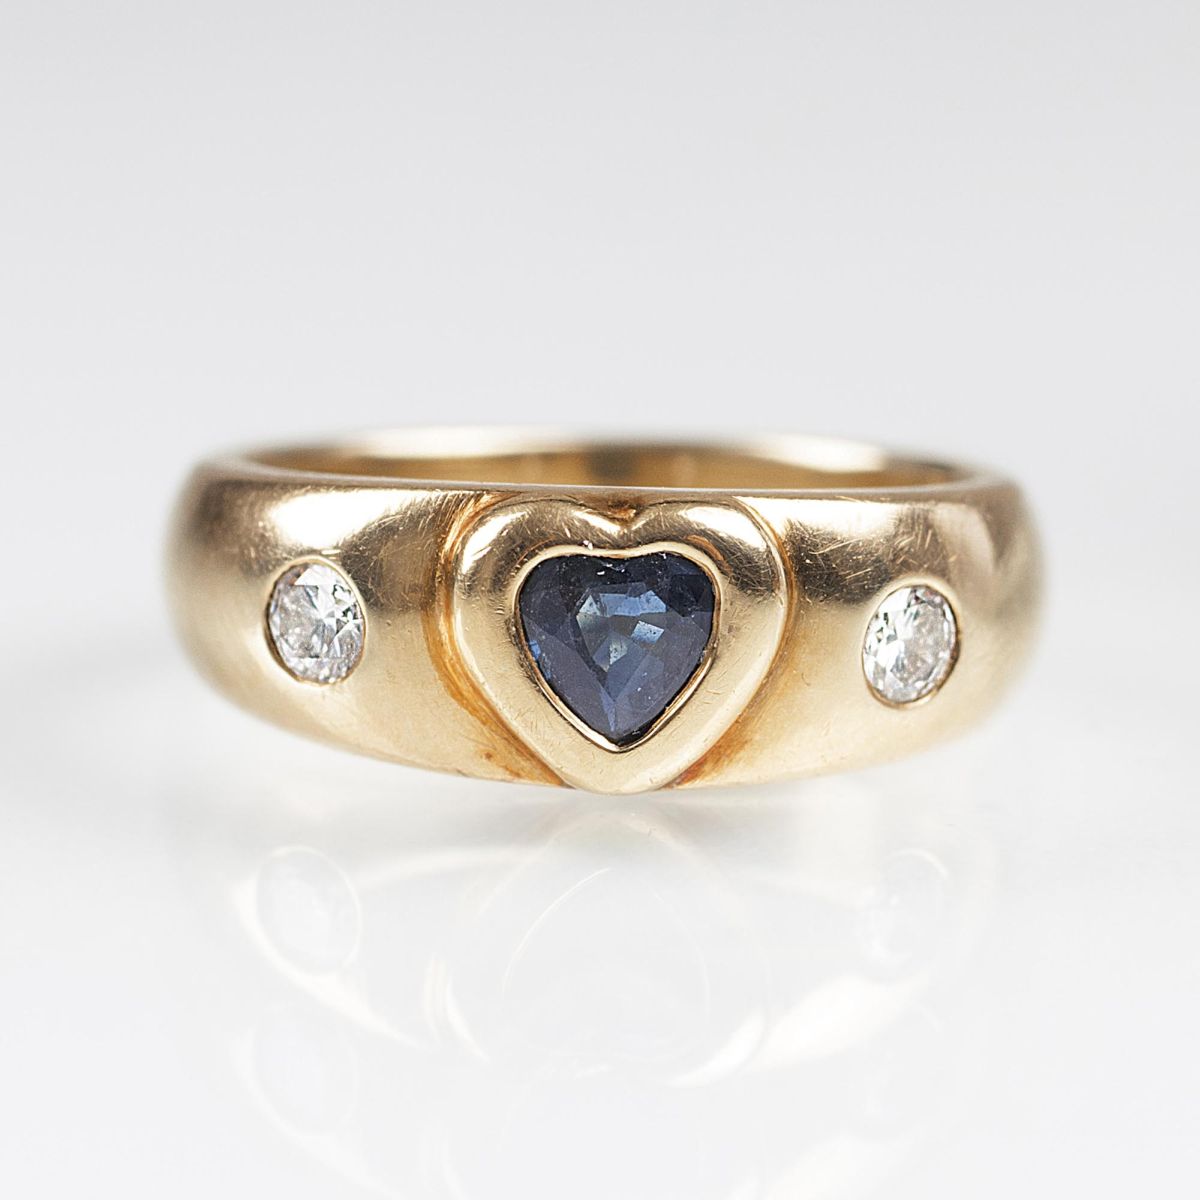 A Gold Ring with Sapphire Heart and Diamonds